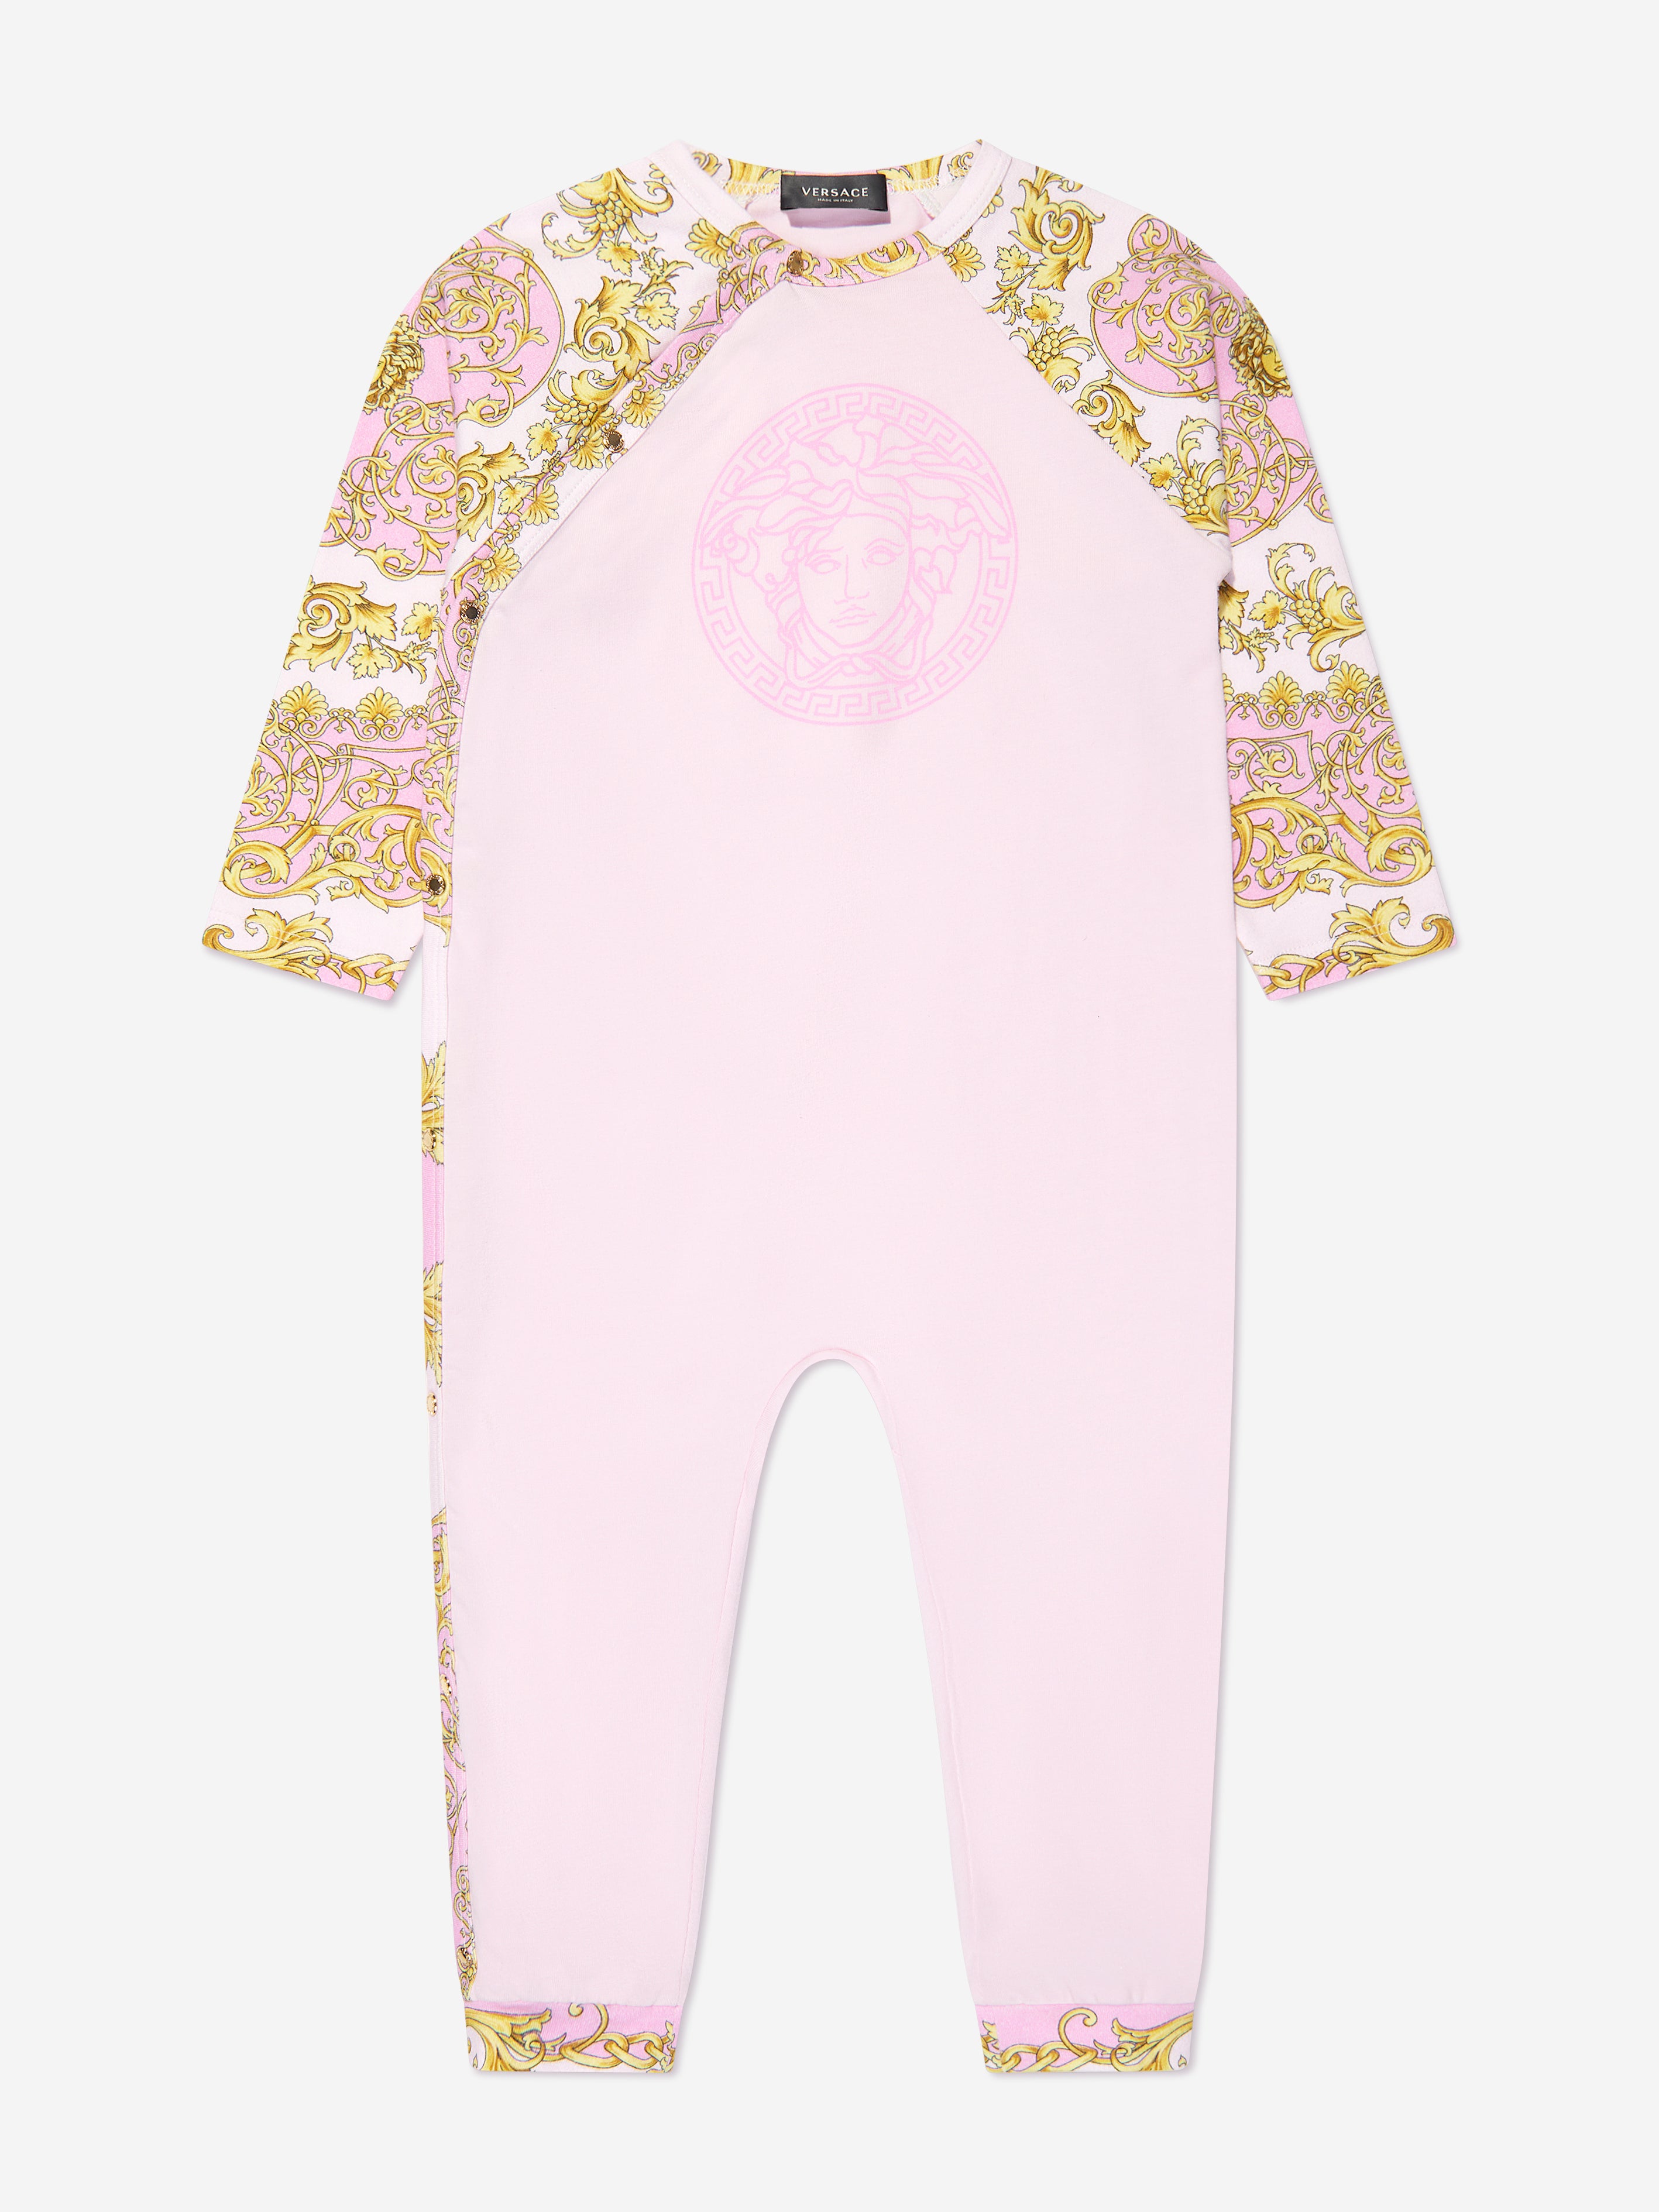 Versace Girls Barocco Romper in Pink Clothing